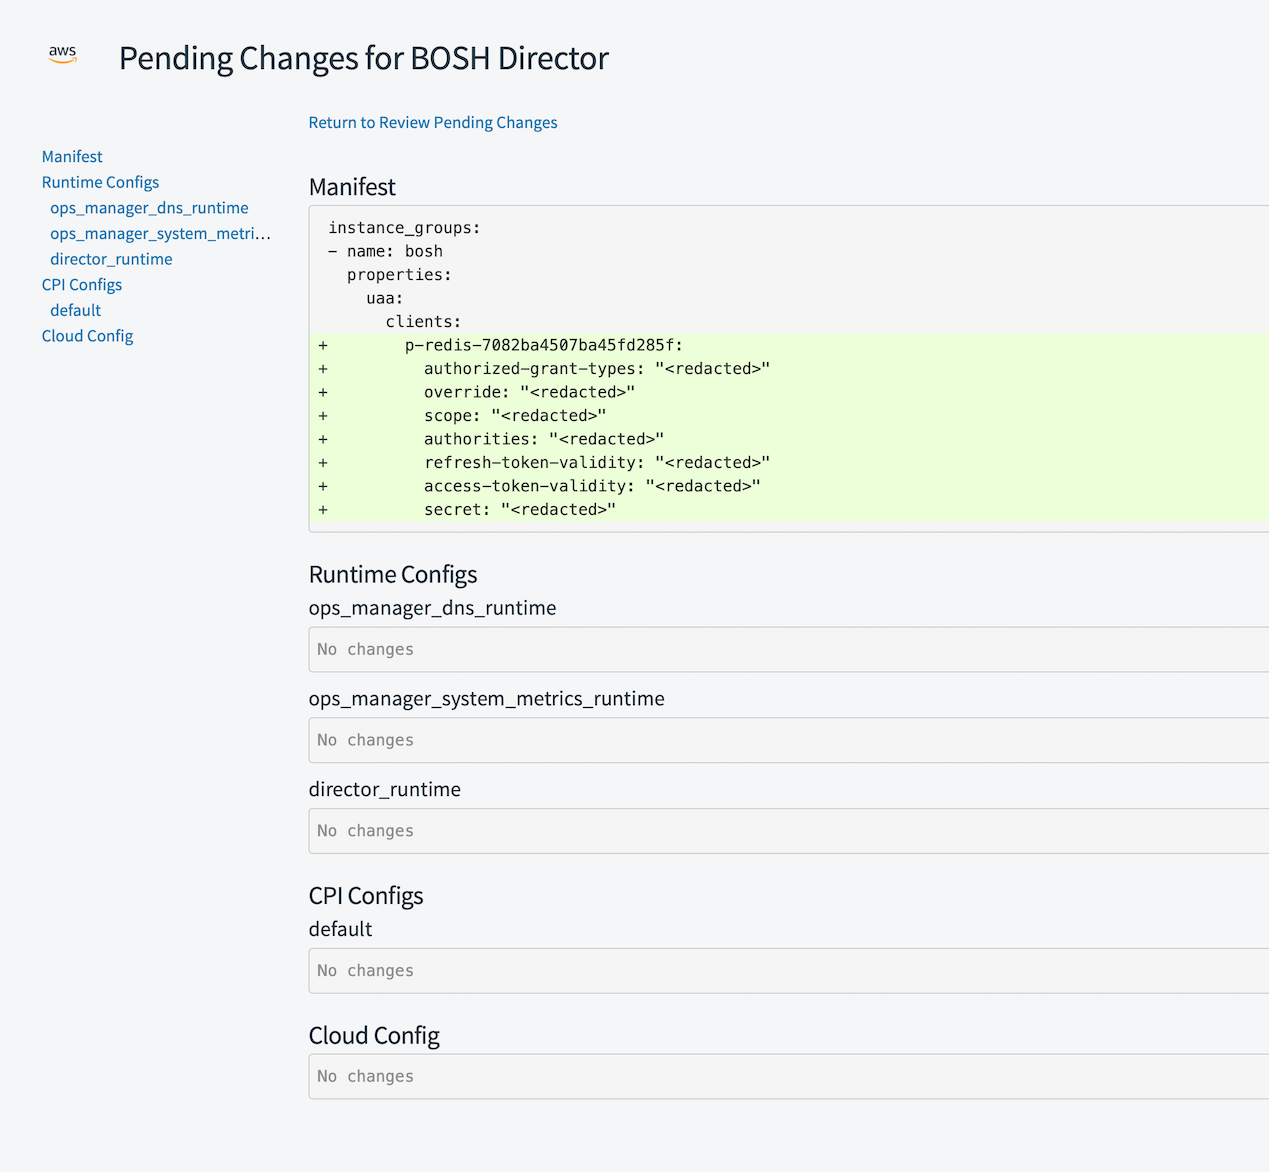 Pending changes for BOSH Director, showing changes to the manifest.